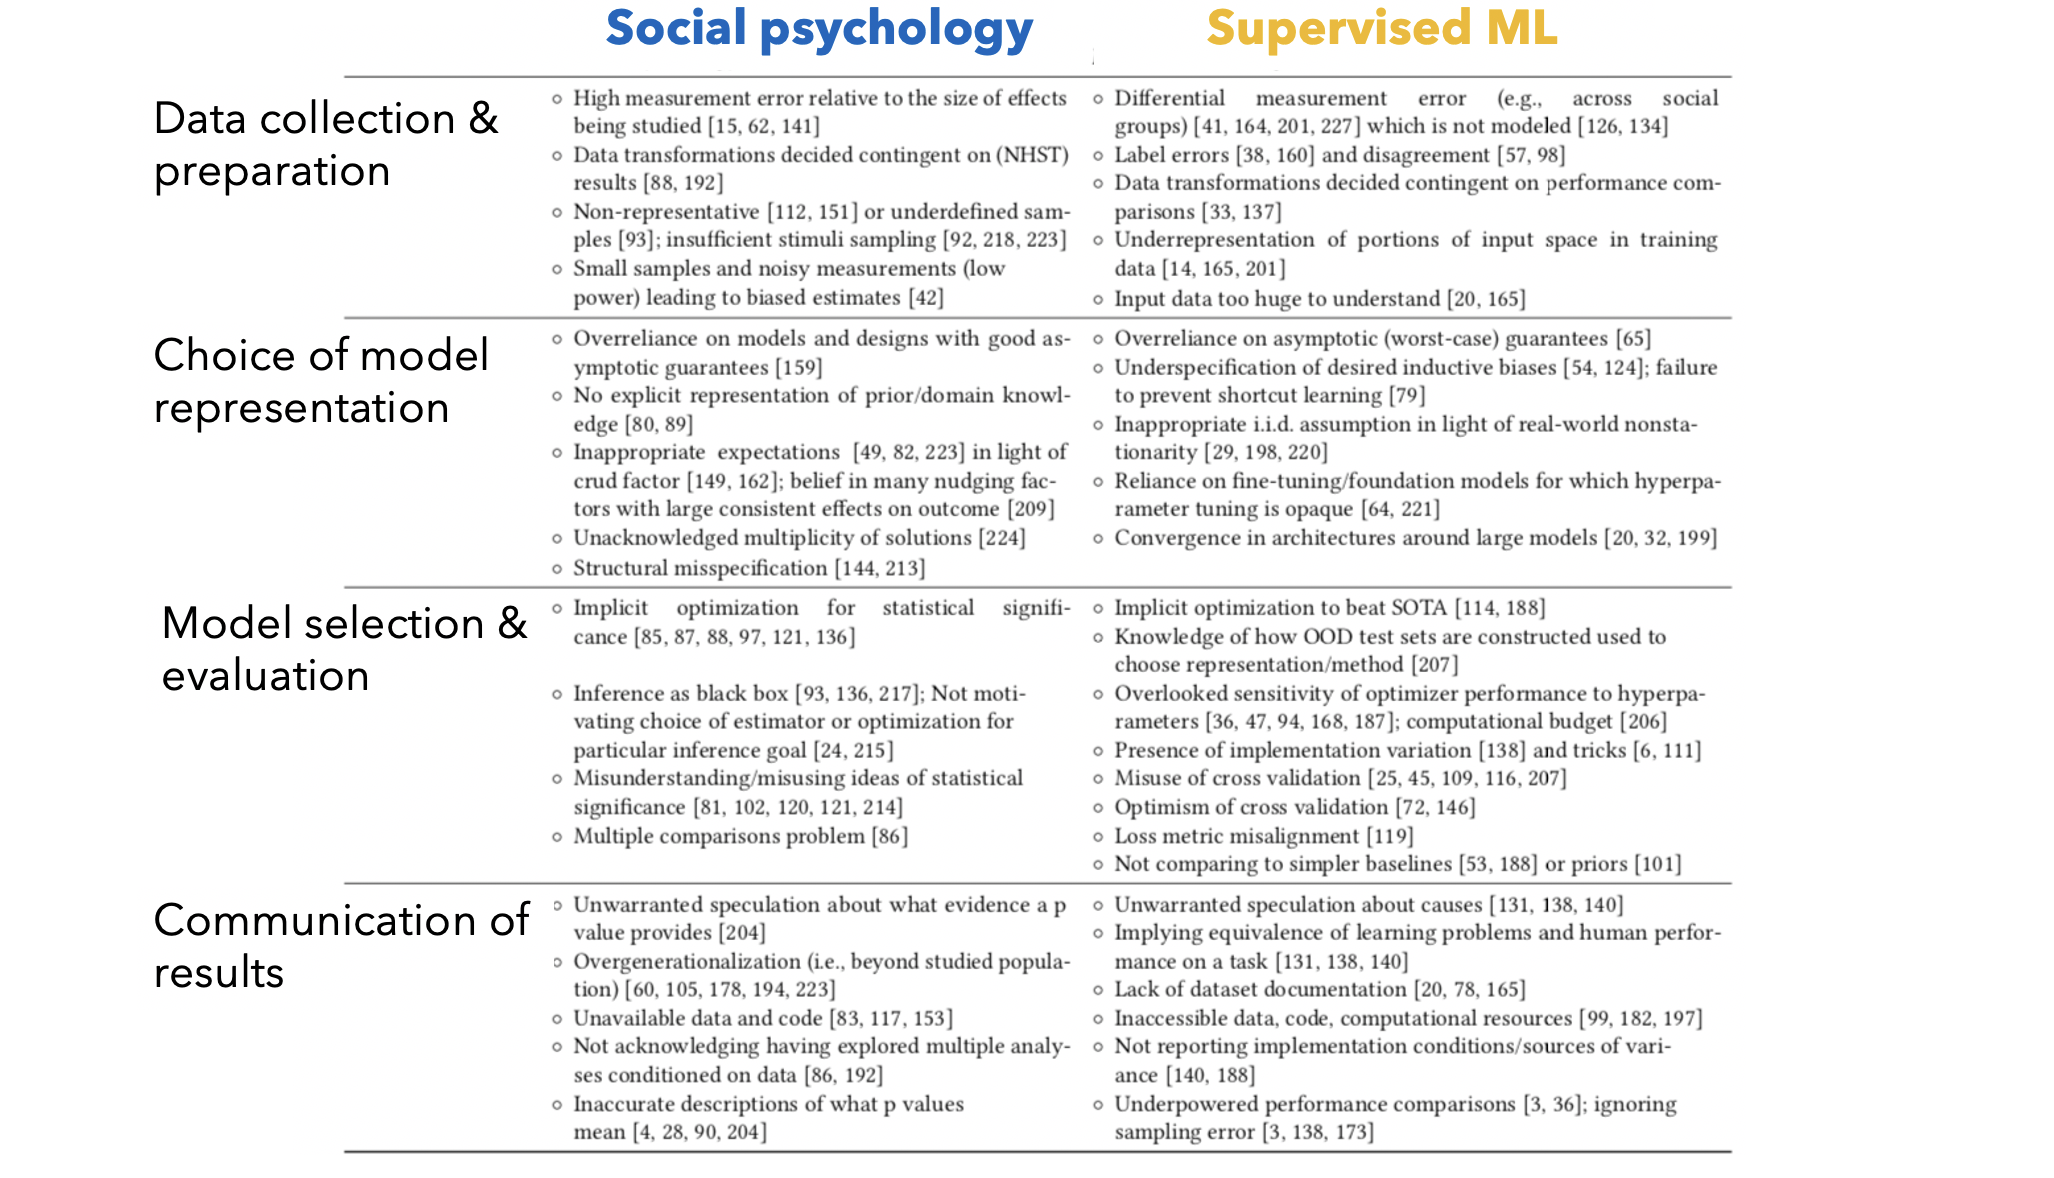 Overview of cited learning concerns, roughly ordered to emphasize similarities across social psychology and ML.